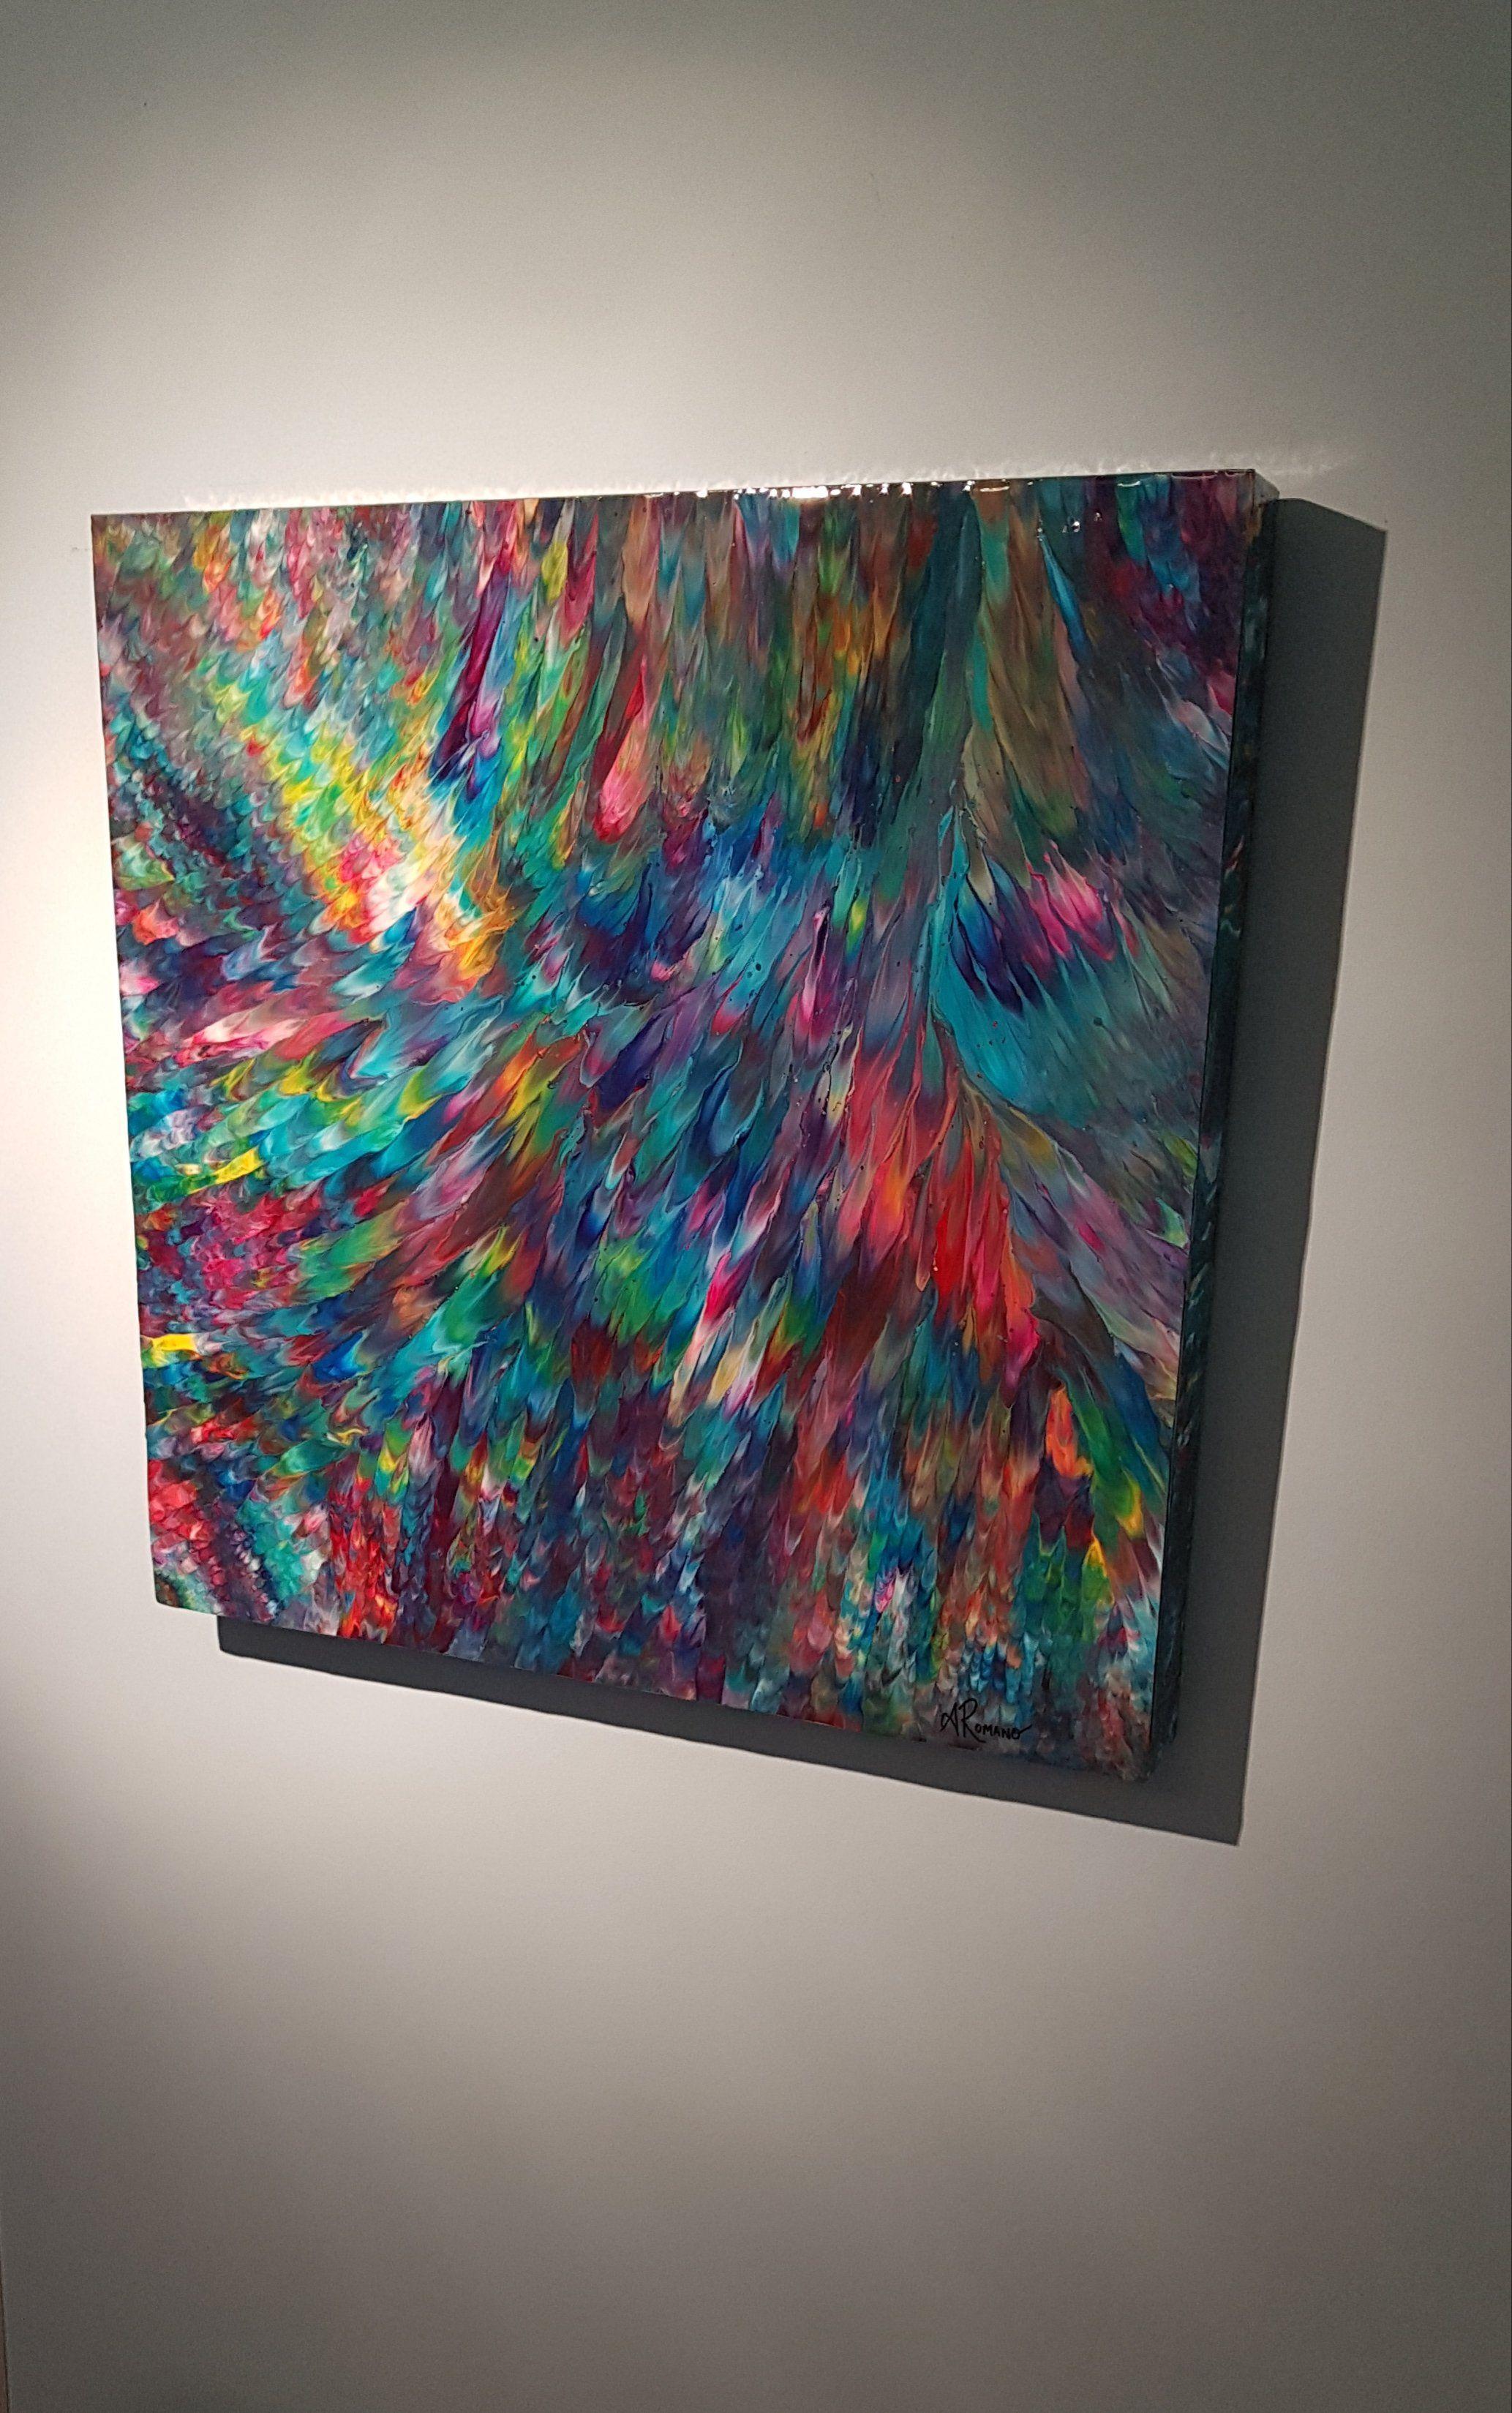 Psychedelic Waterfall No. 6 is a bold abstract painting with beautiful motion and vibrant colours. This original statement piece has a high gloss resin finish which brings out the colours even more and is created on a custom made wood canvas with